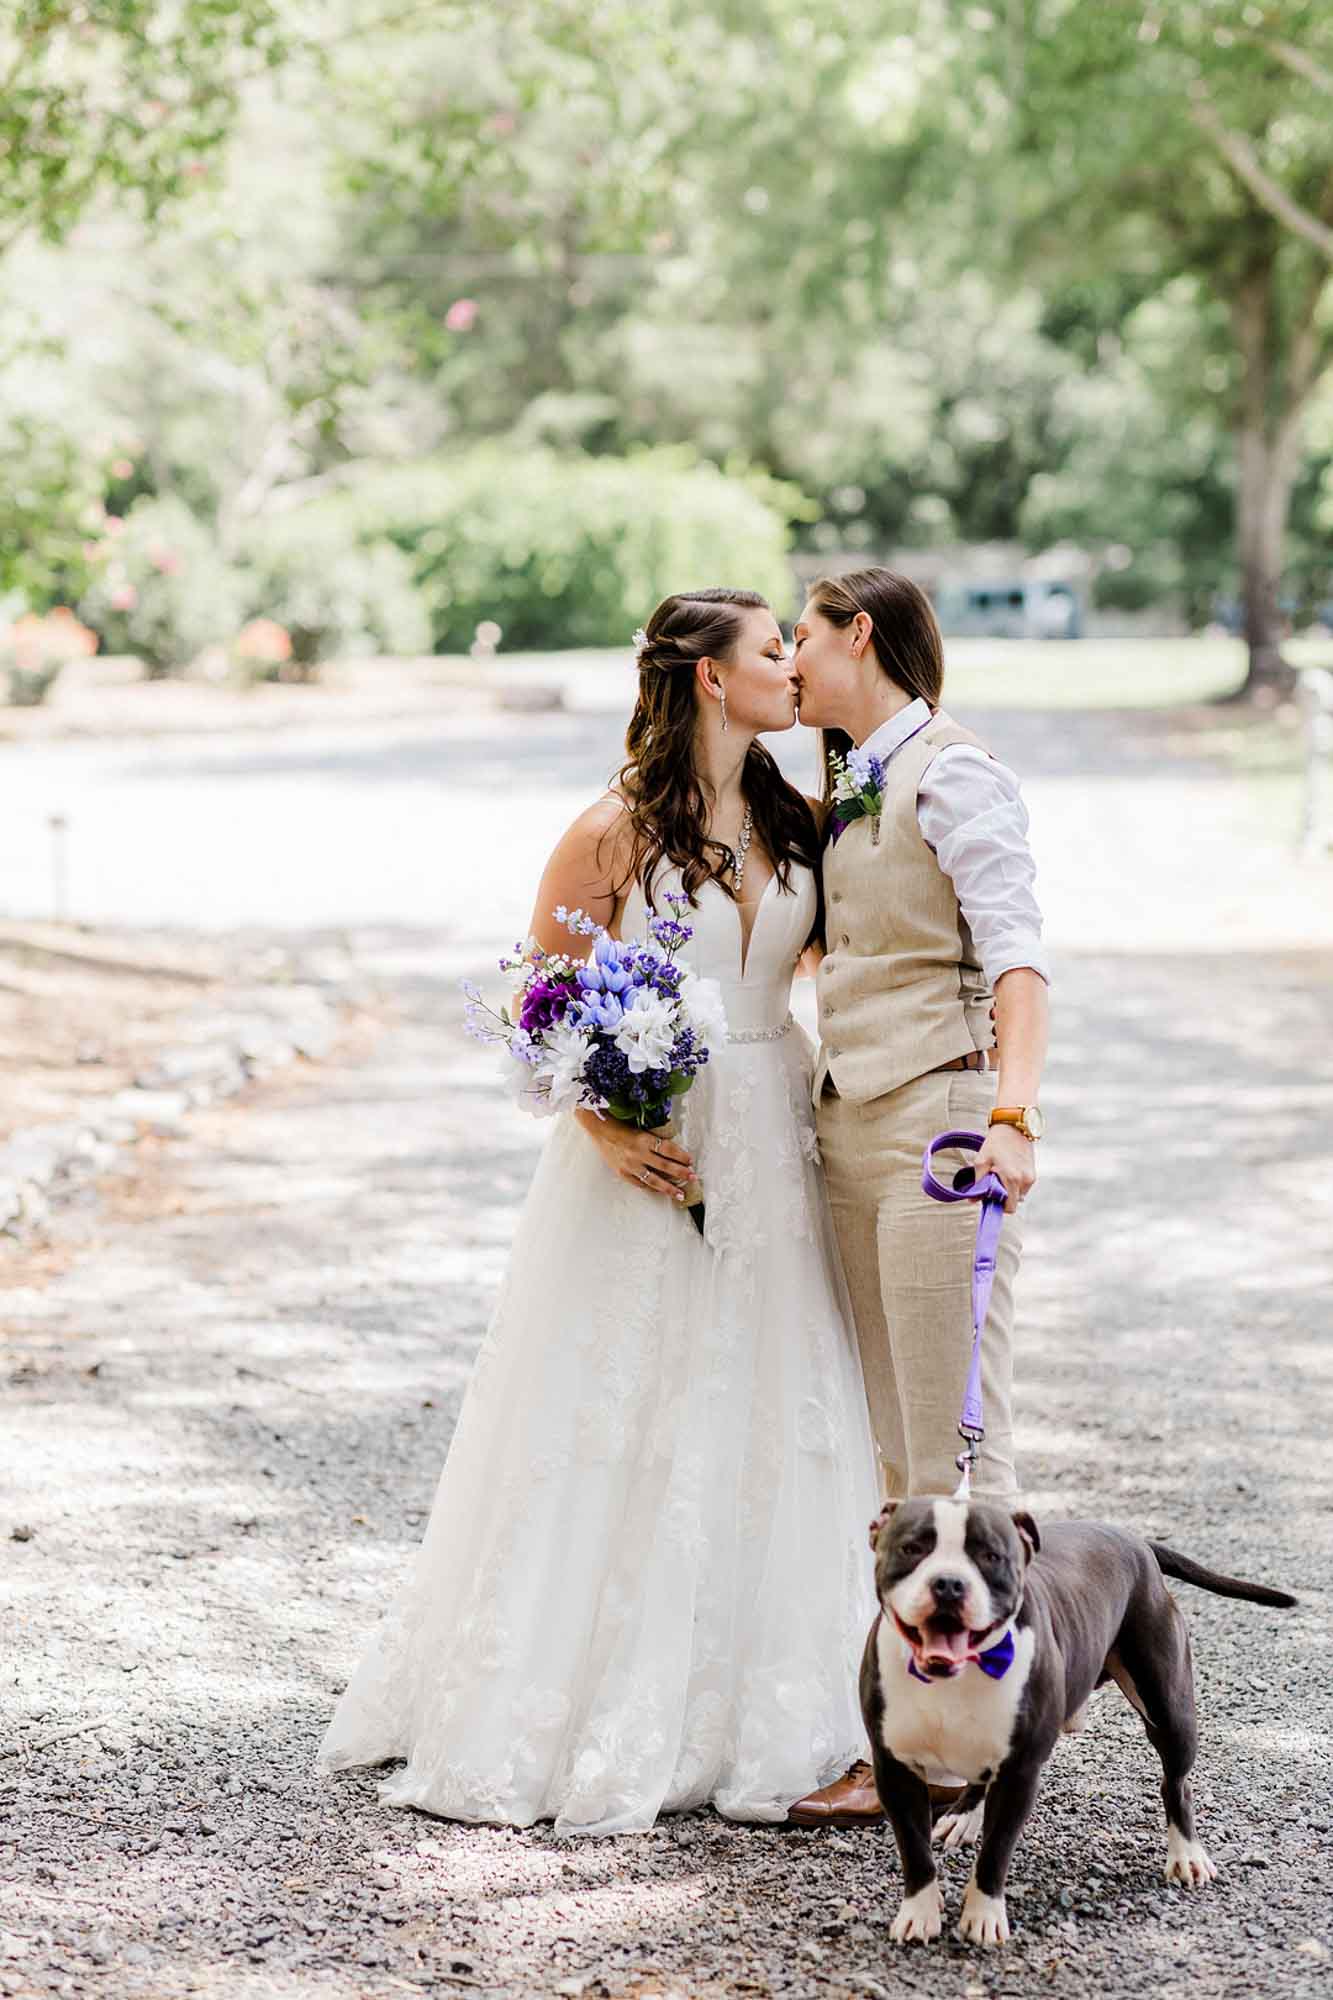 Outdoor South Carolina wedding with purple accents | Wyeth Augustine Photography | Featured on Equally Wed, the leading LGBTQ+ wedding magazine